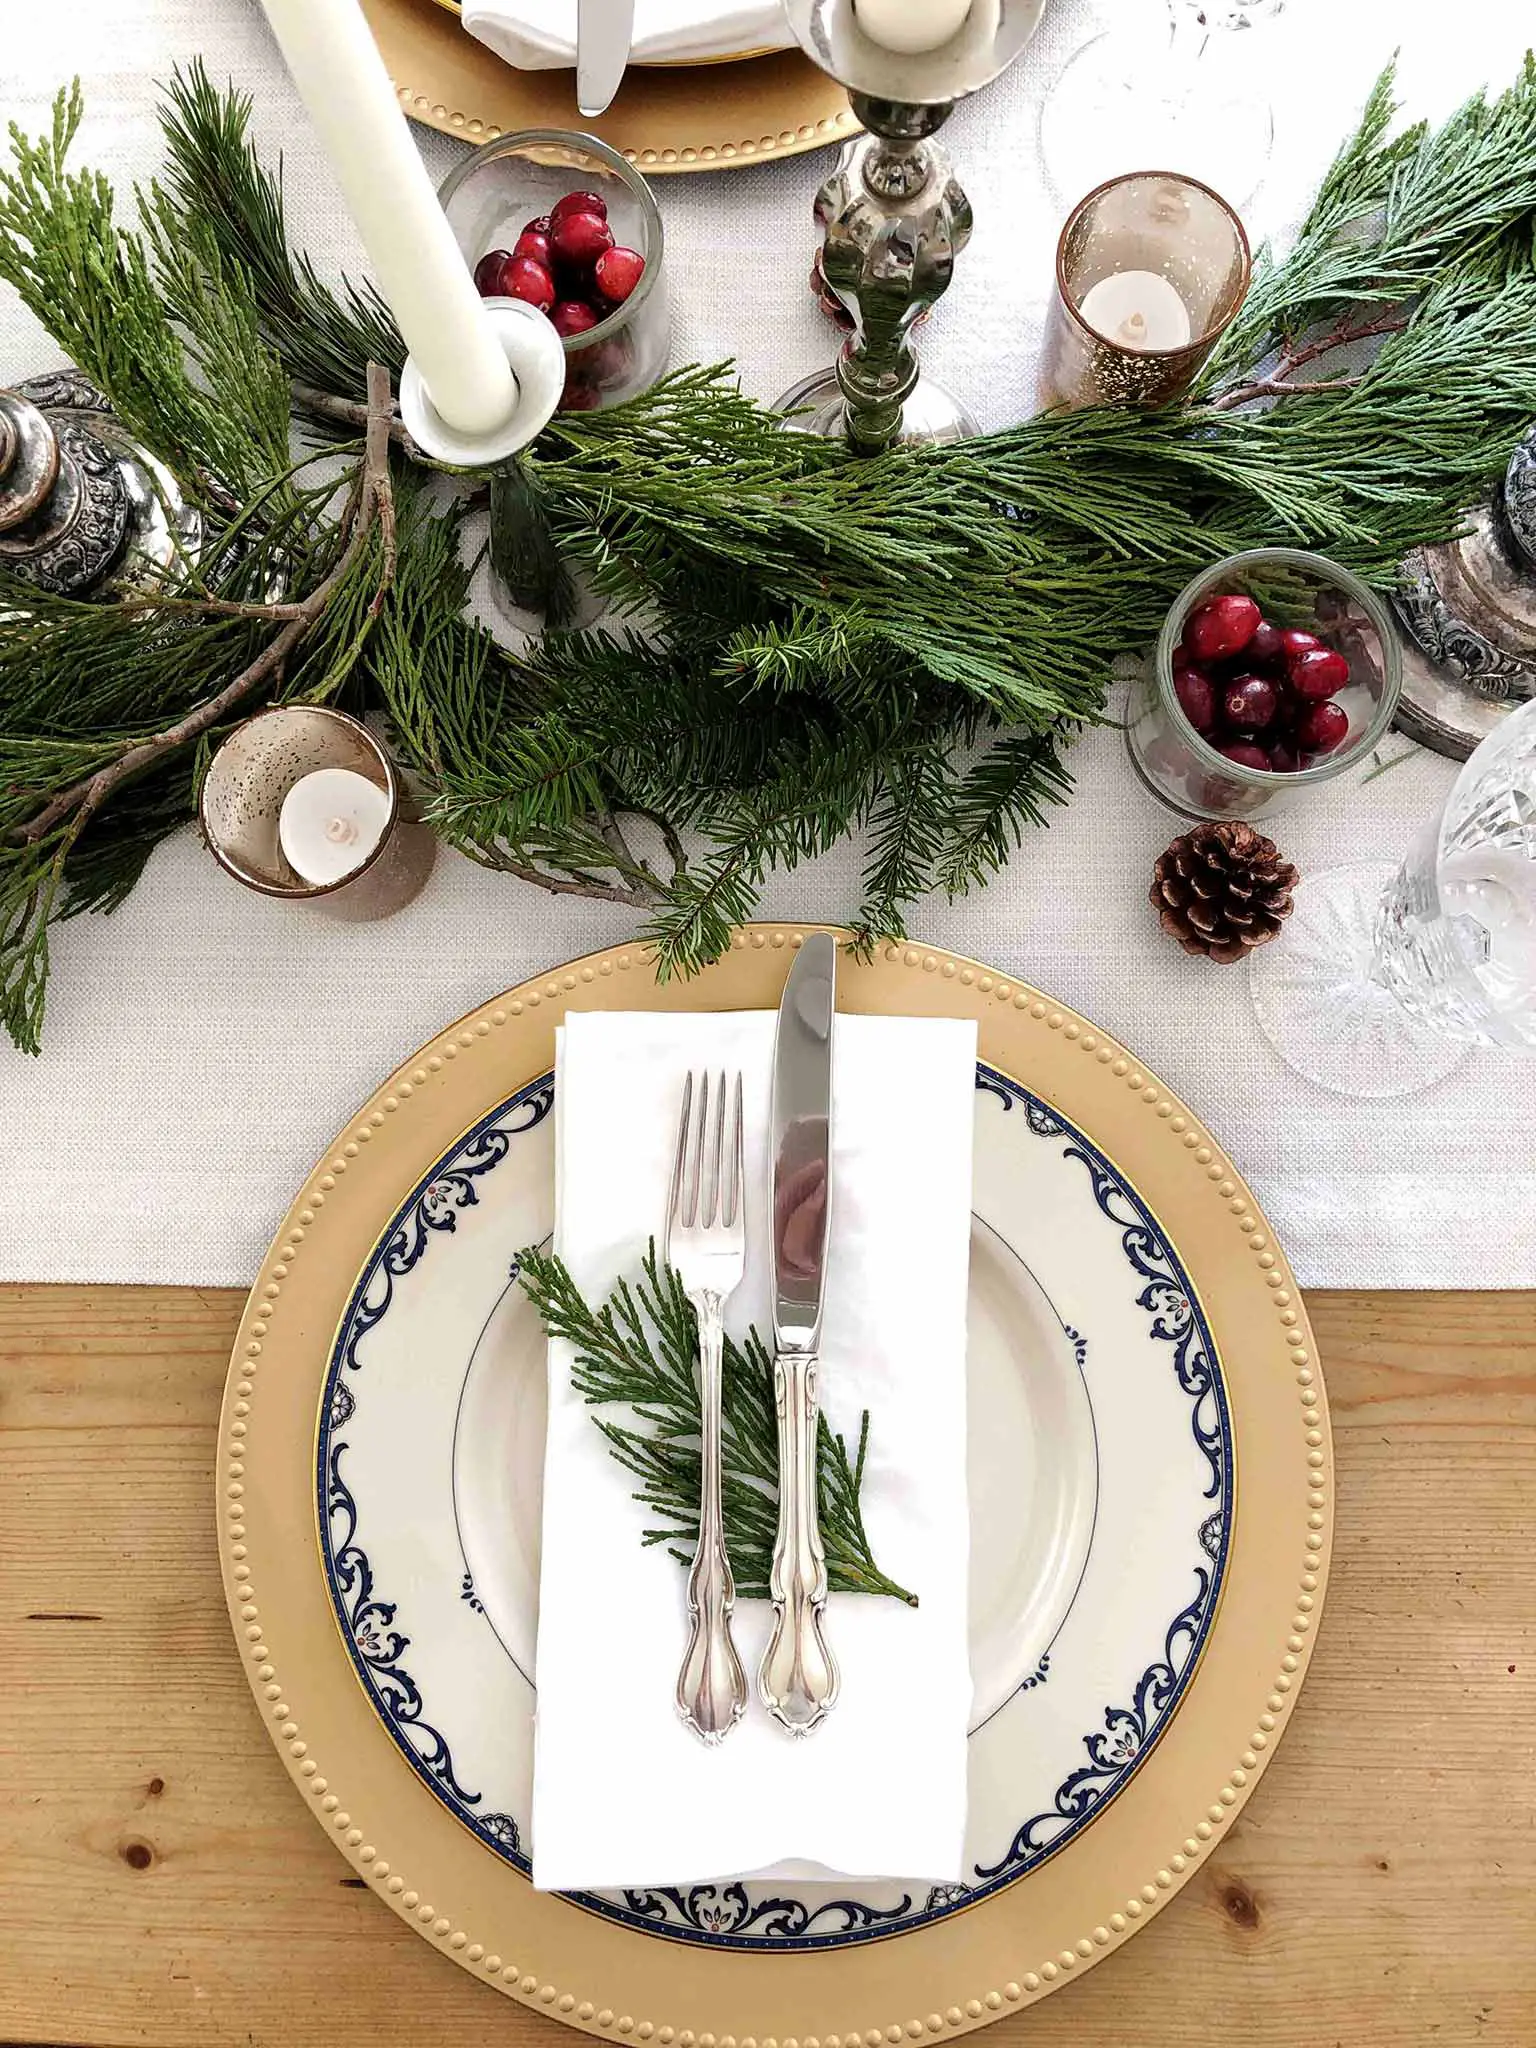 Vintage silverware | How to Create a Beautiful Tablescape on a Budget | That Homebird Life Blog #christmasdecor #tablescape